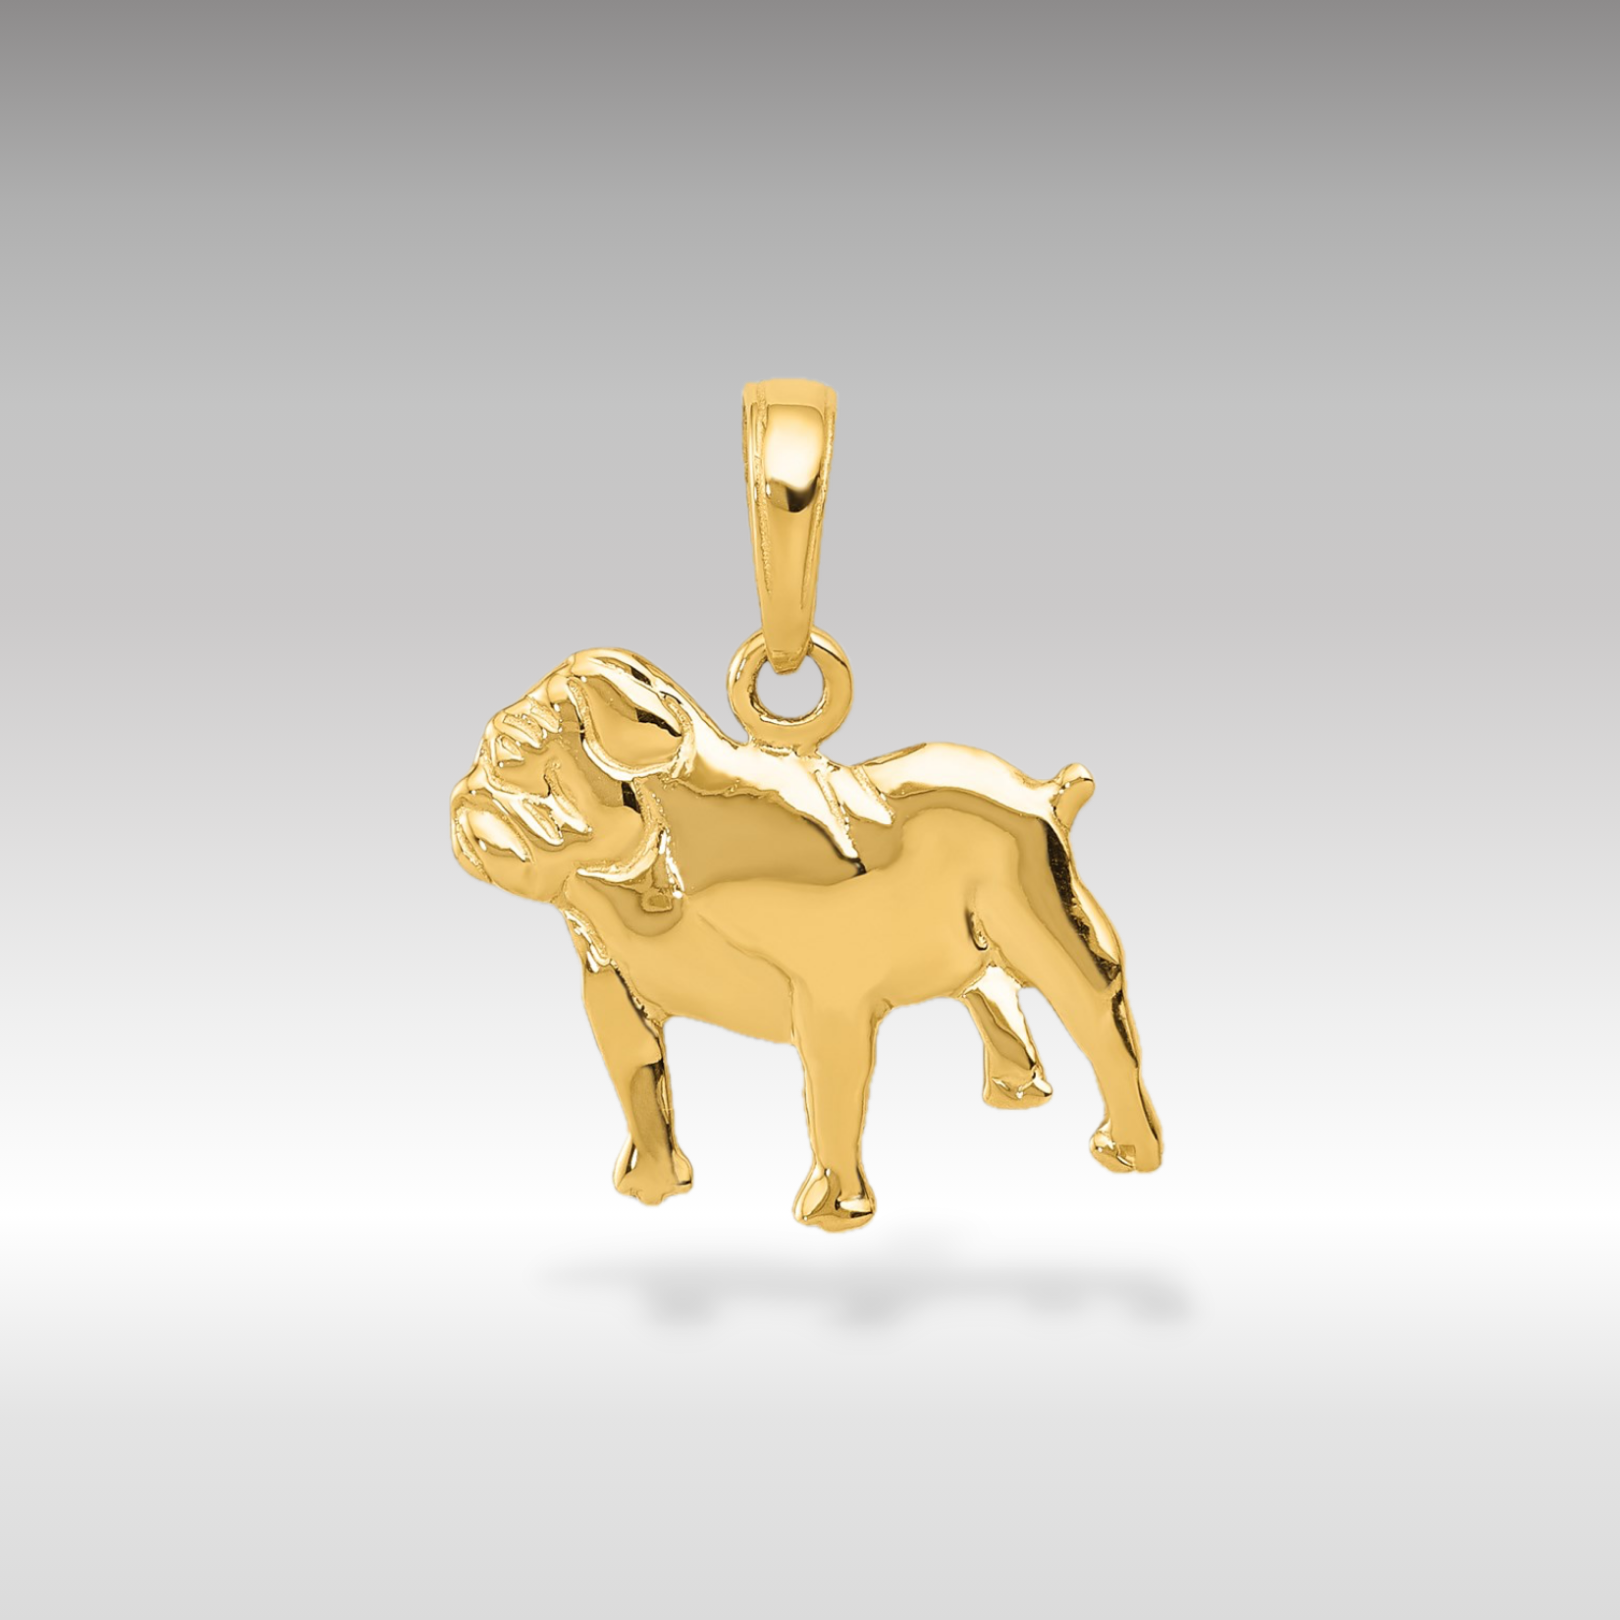 14K Gold Bulldog Charm - Solid Gold Dog Pendant - Charlie & Co. Jewelry